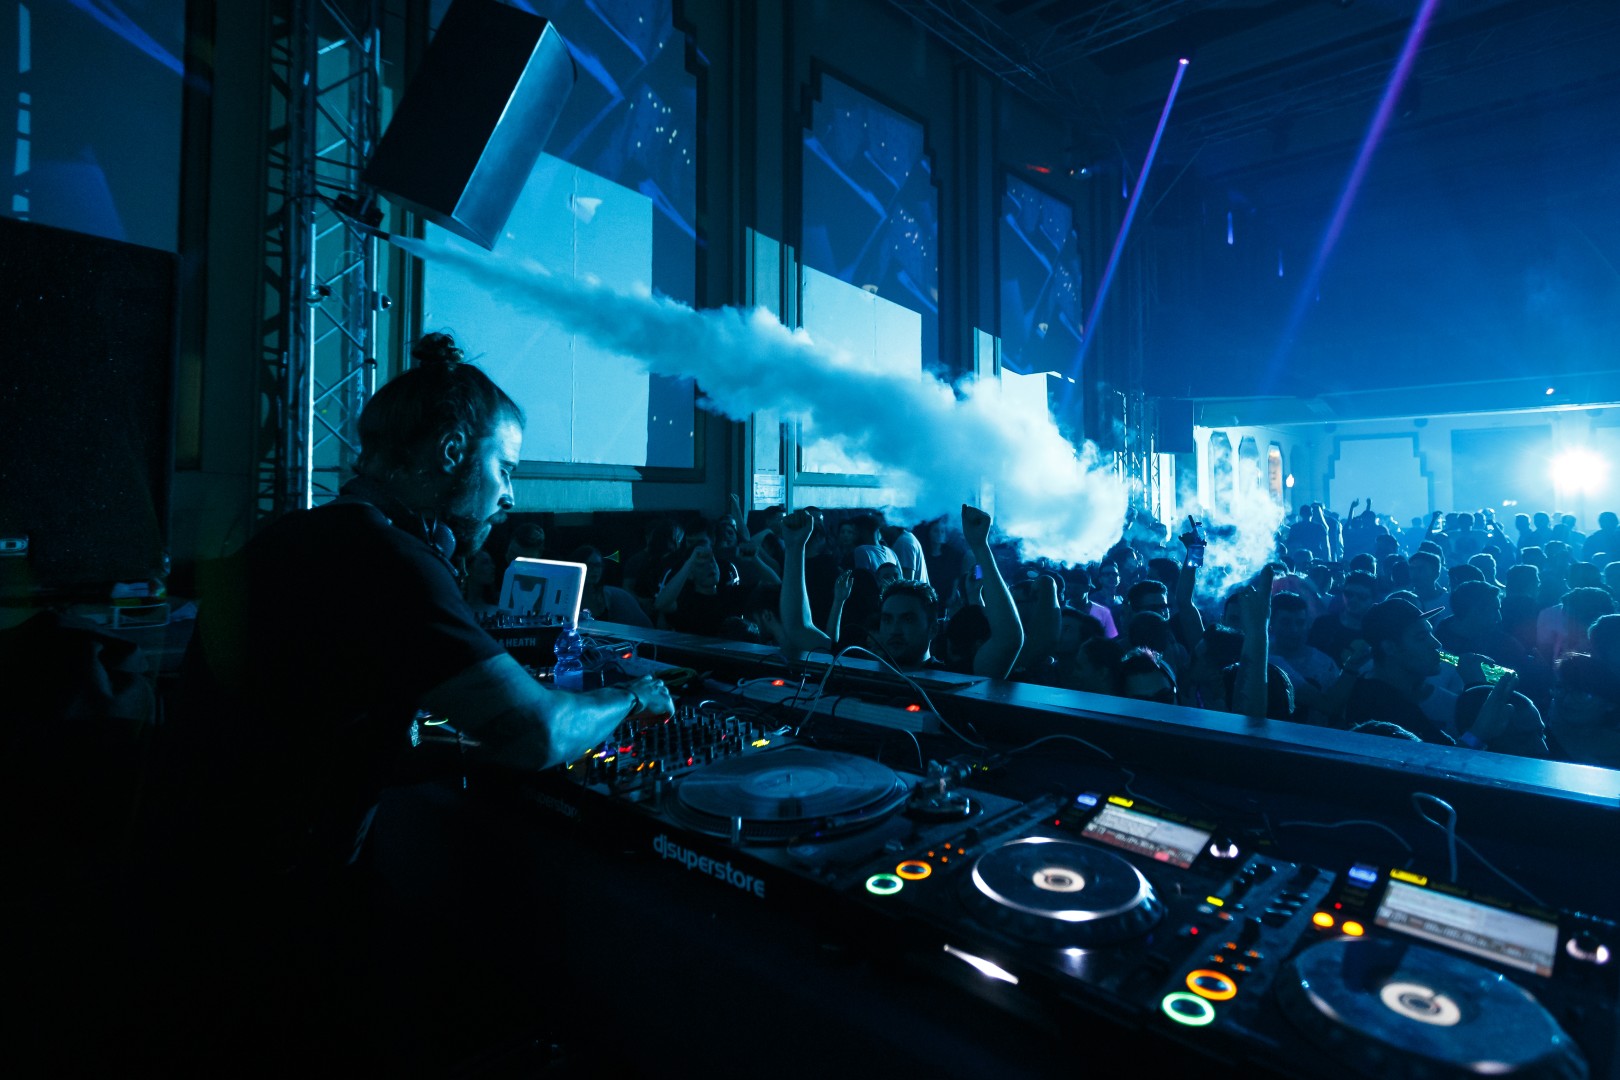 Art Department at Kristal Club in Bucharest on November 30, 2015 (c1ab8160ca)